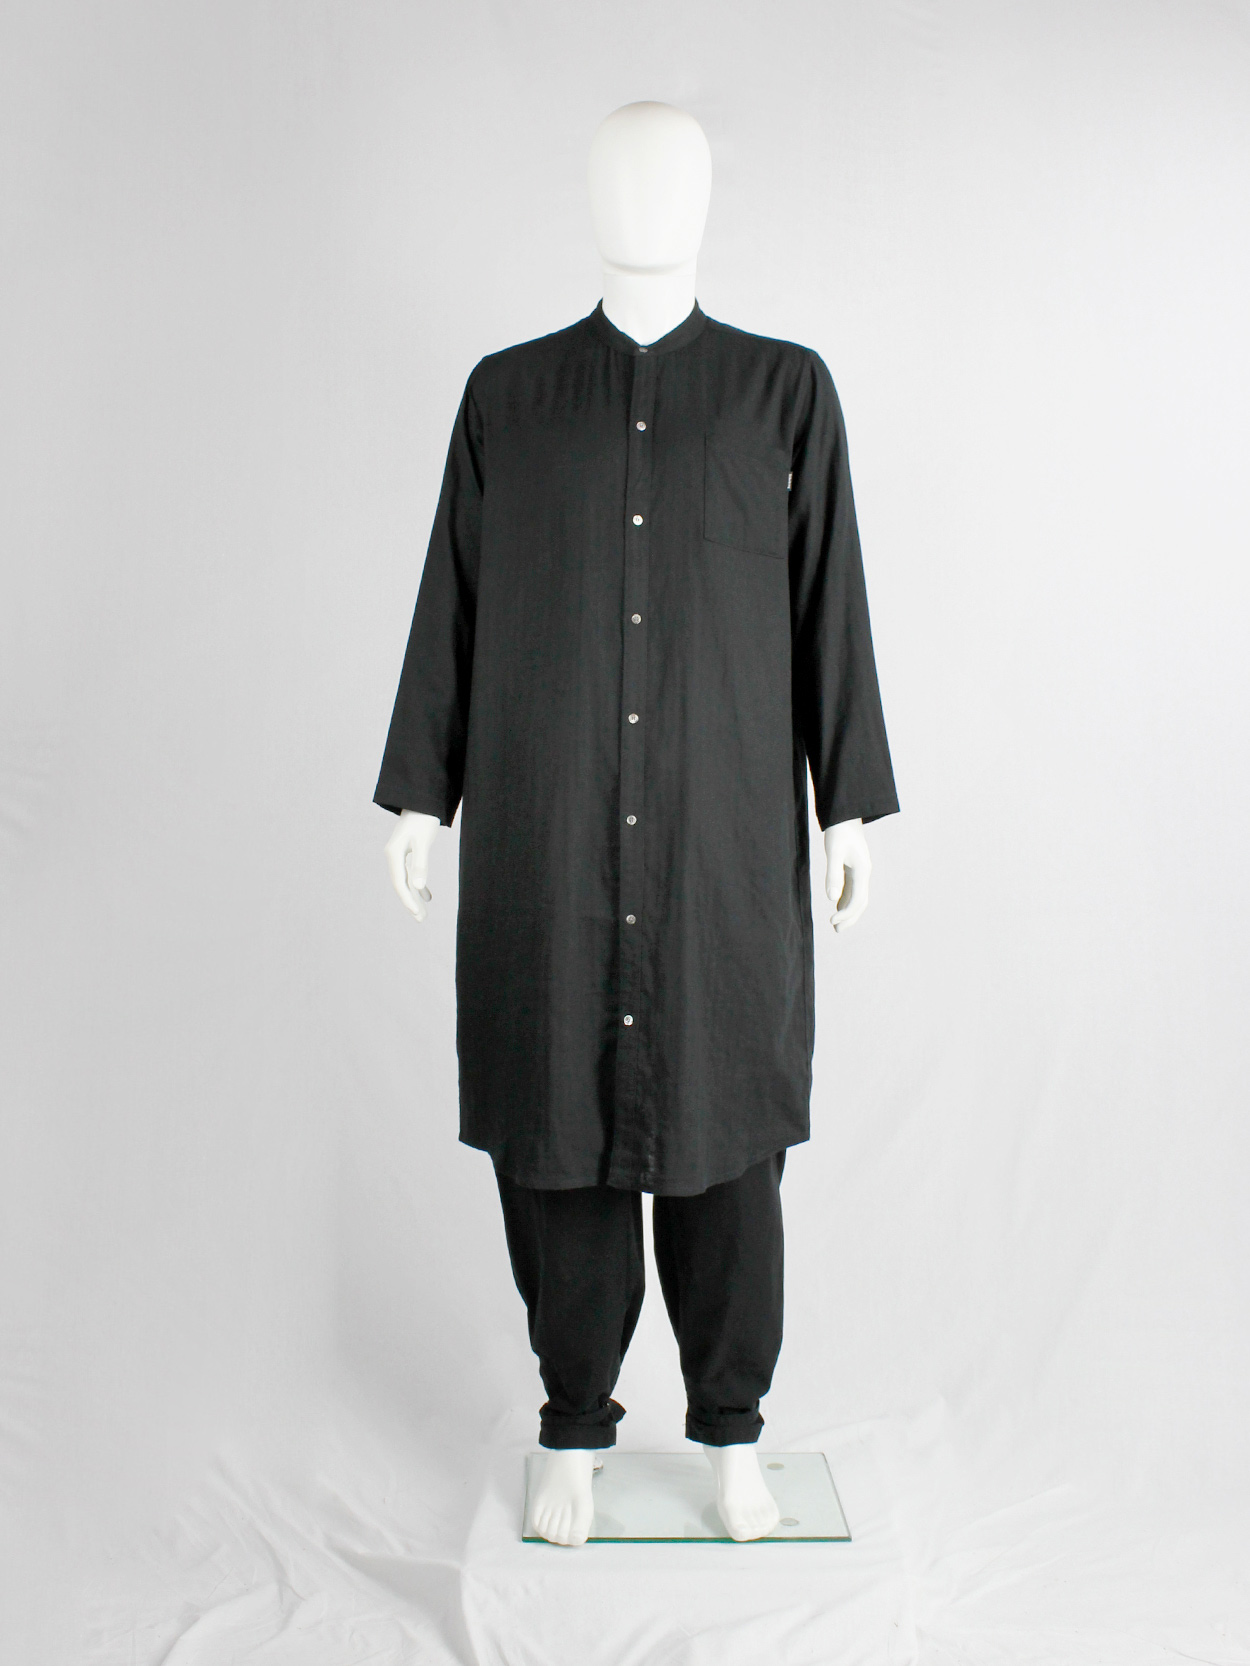 Y's for living black extra long minimalist shirt with contrasting white ...